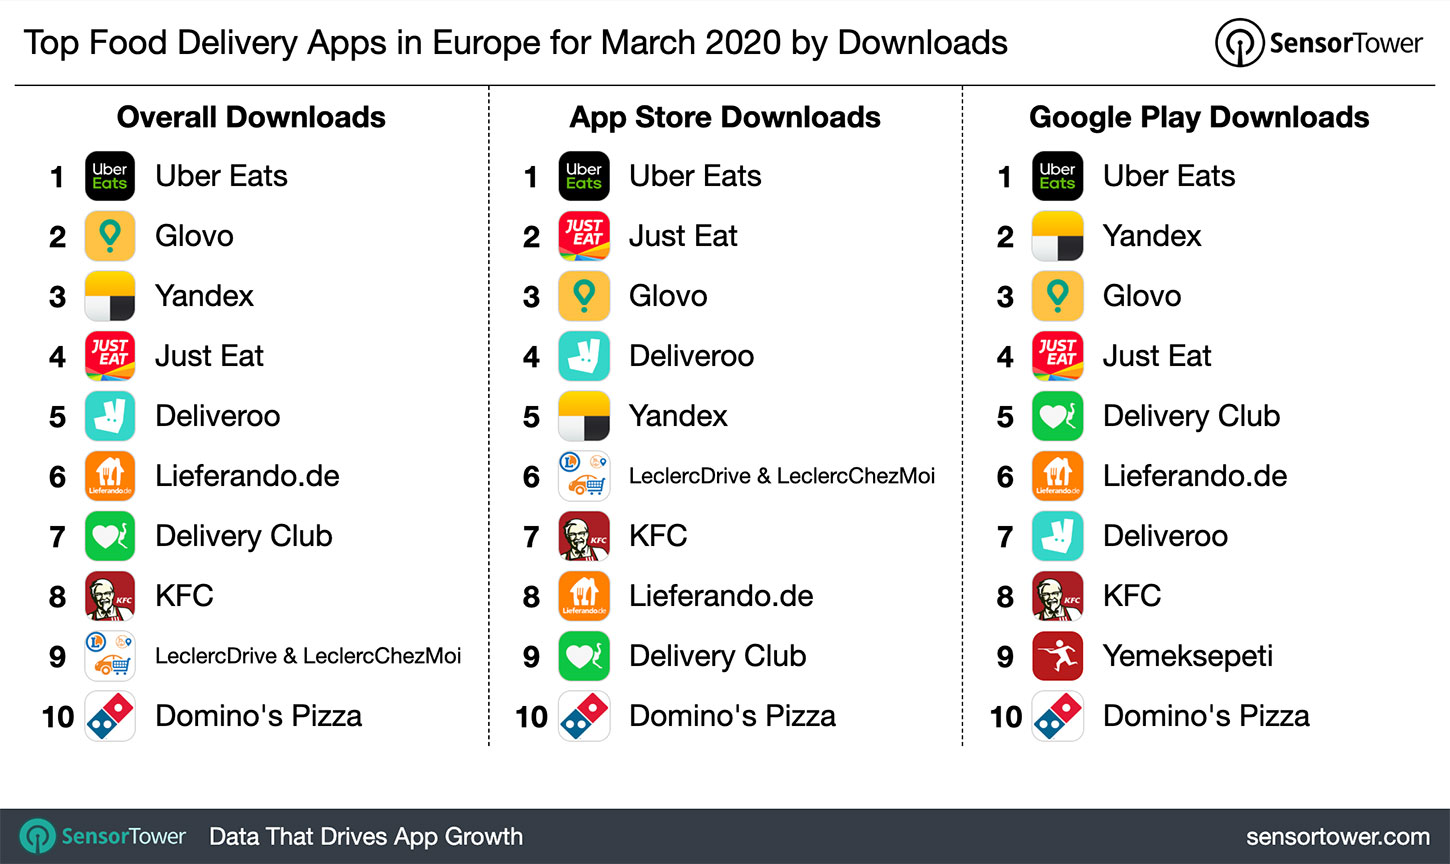 Top Food Delivery Apps in Europe for March 2020 by Downloads